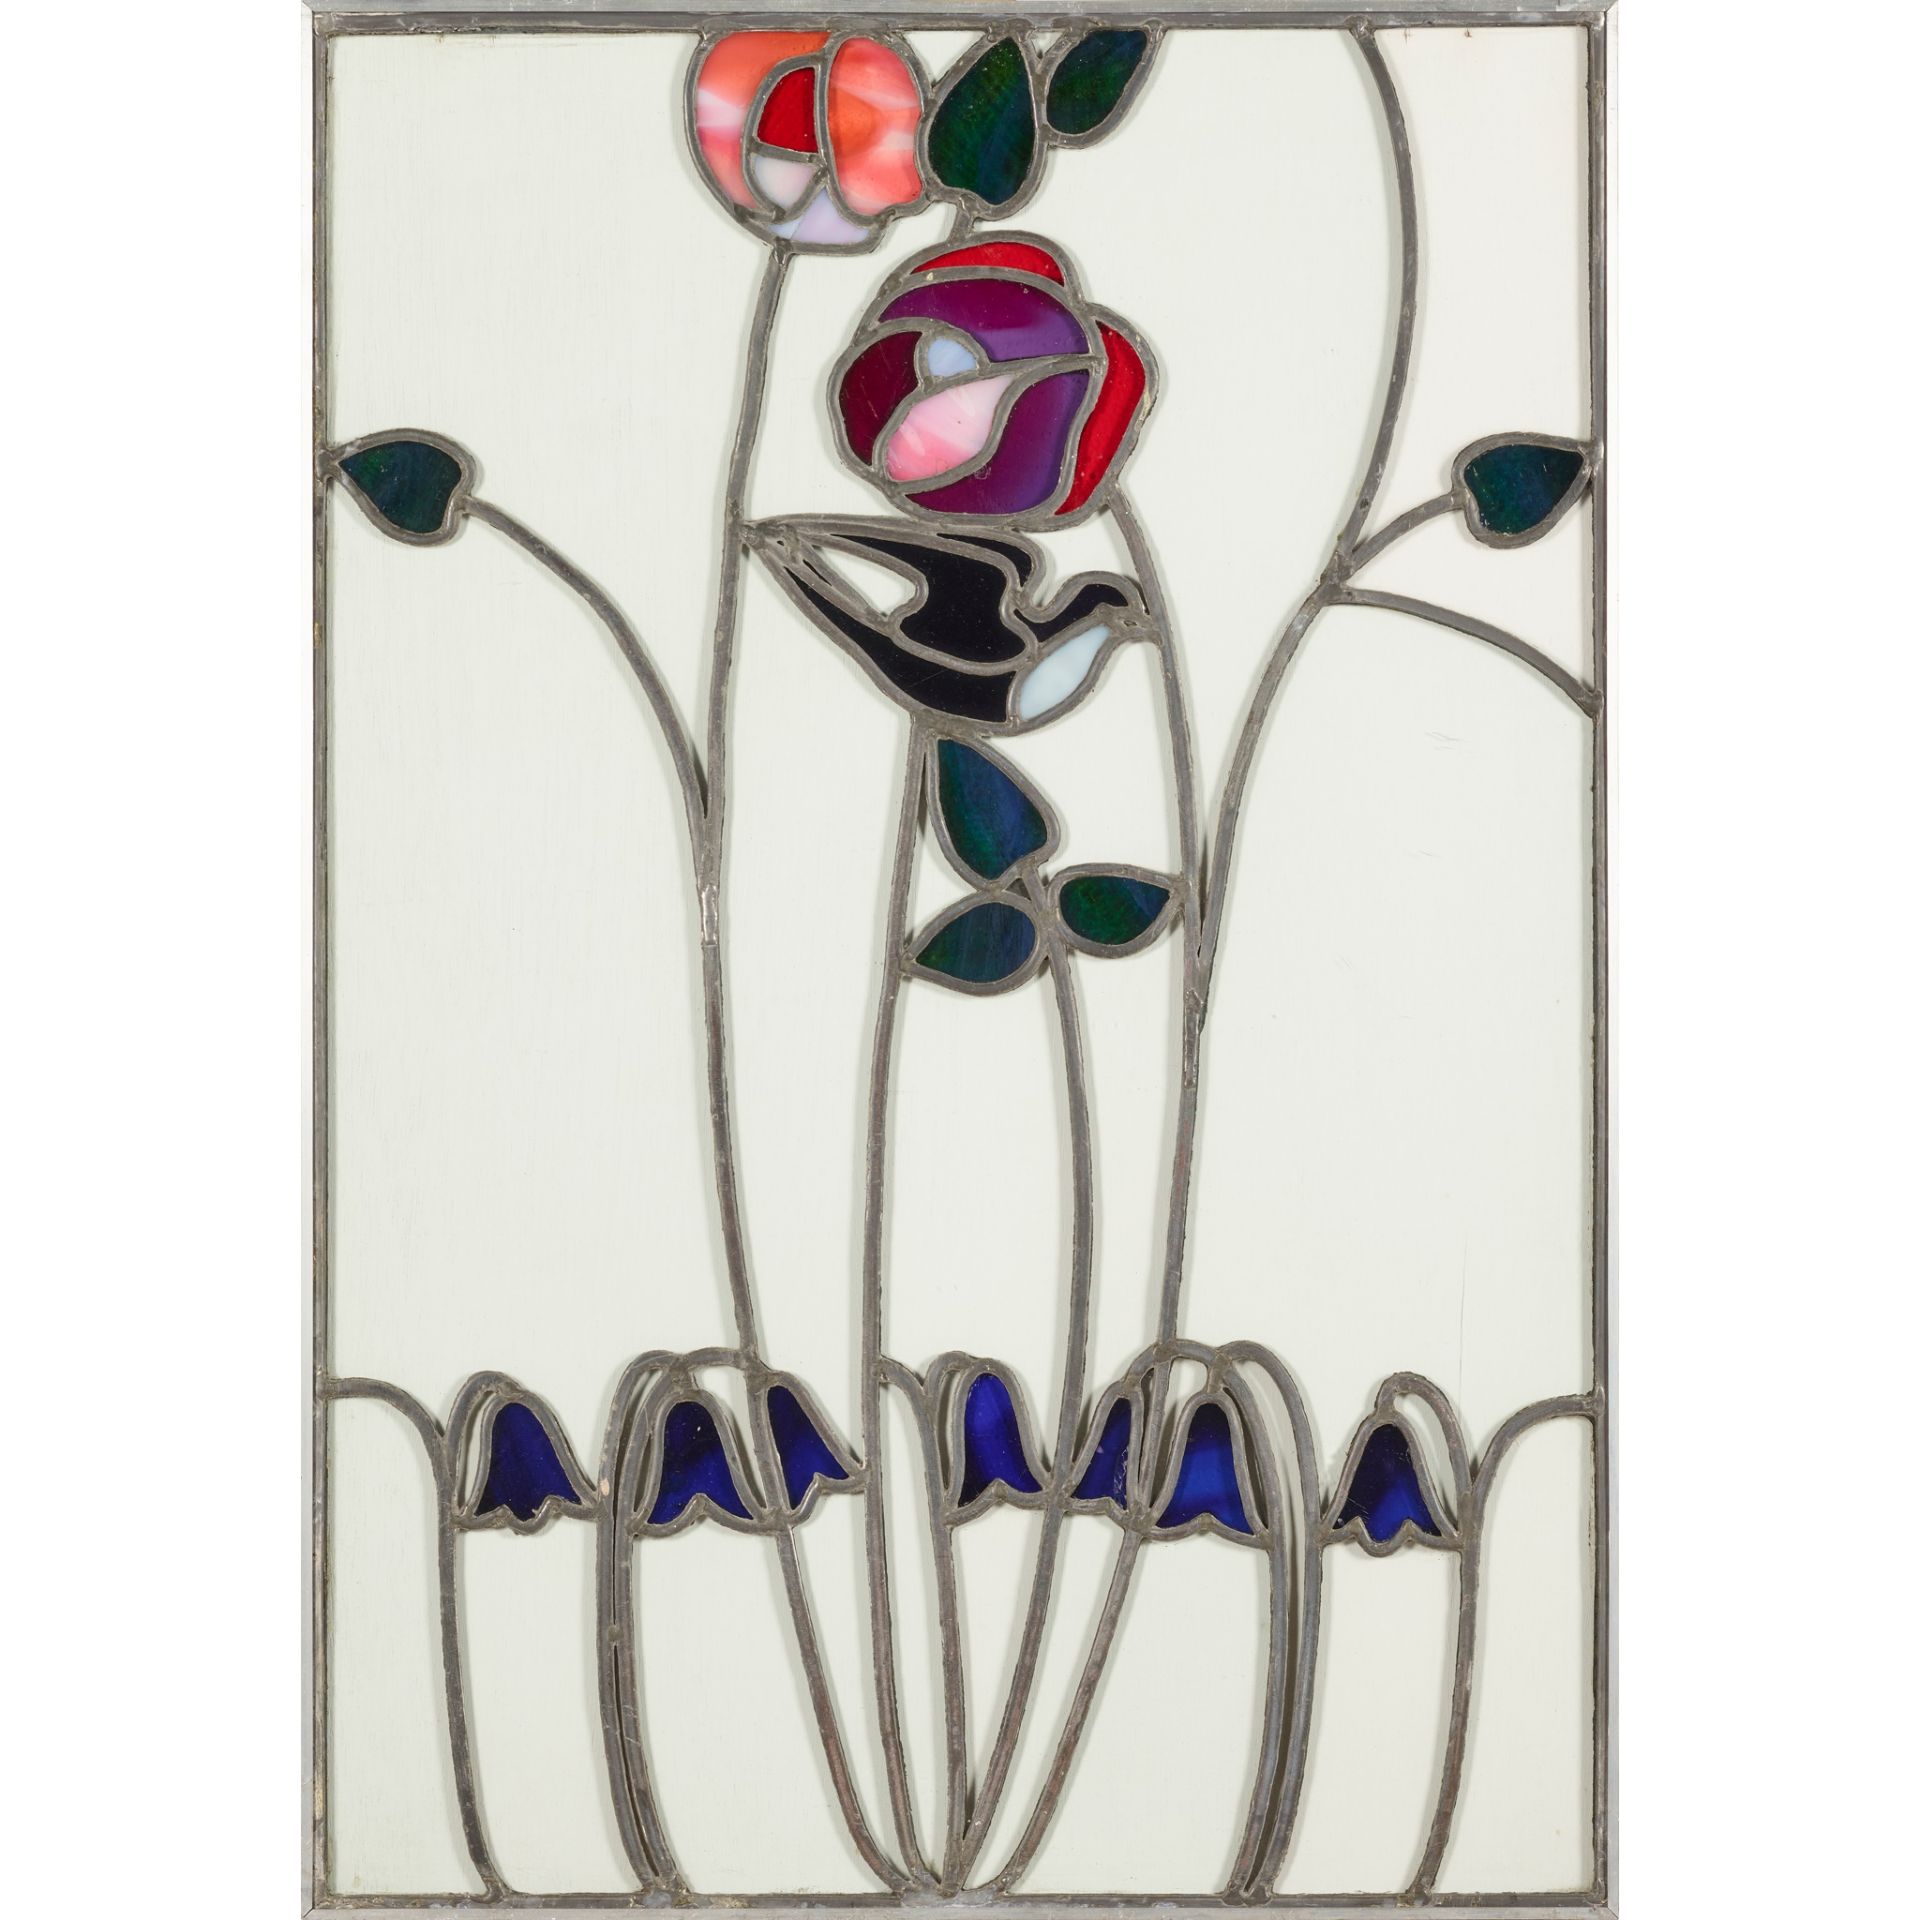 ERNEST ARCHIBALD TAYLOR (1874-1951) (ATTRIBUTED DESIGNER) SUITE OF STAINED GLASS, CIRCA 1900 - Image 2 of 7